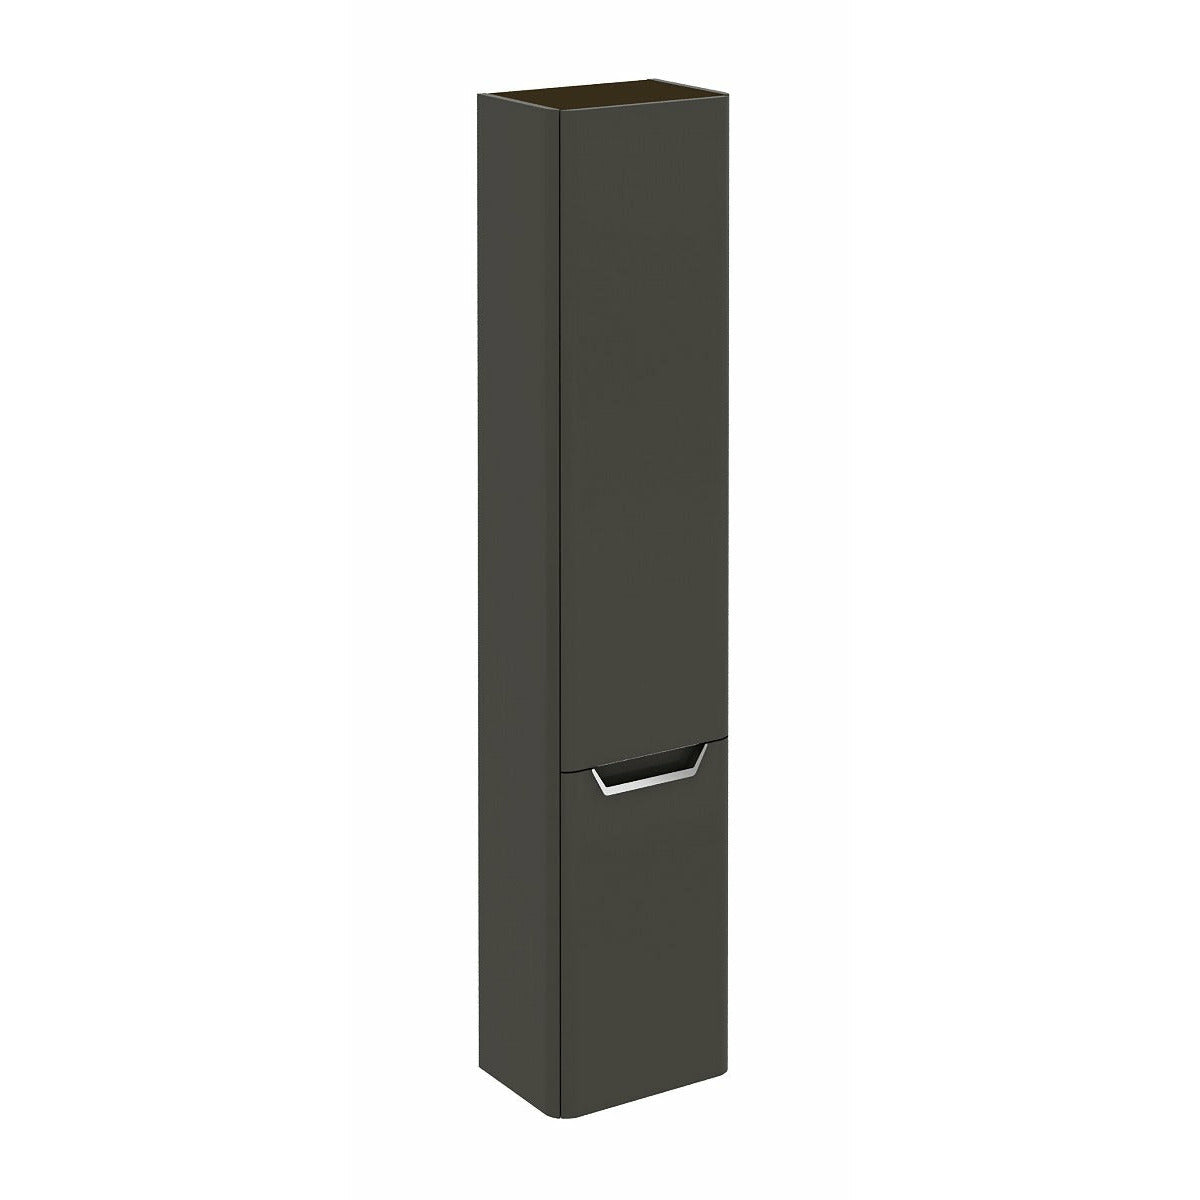 Frontline Life Anthracite Tall Wall Unit - LH - Letta London - 